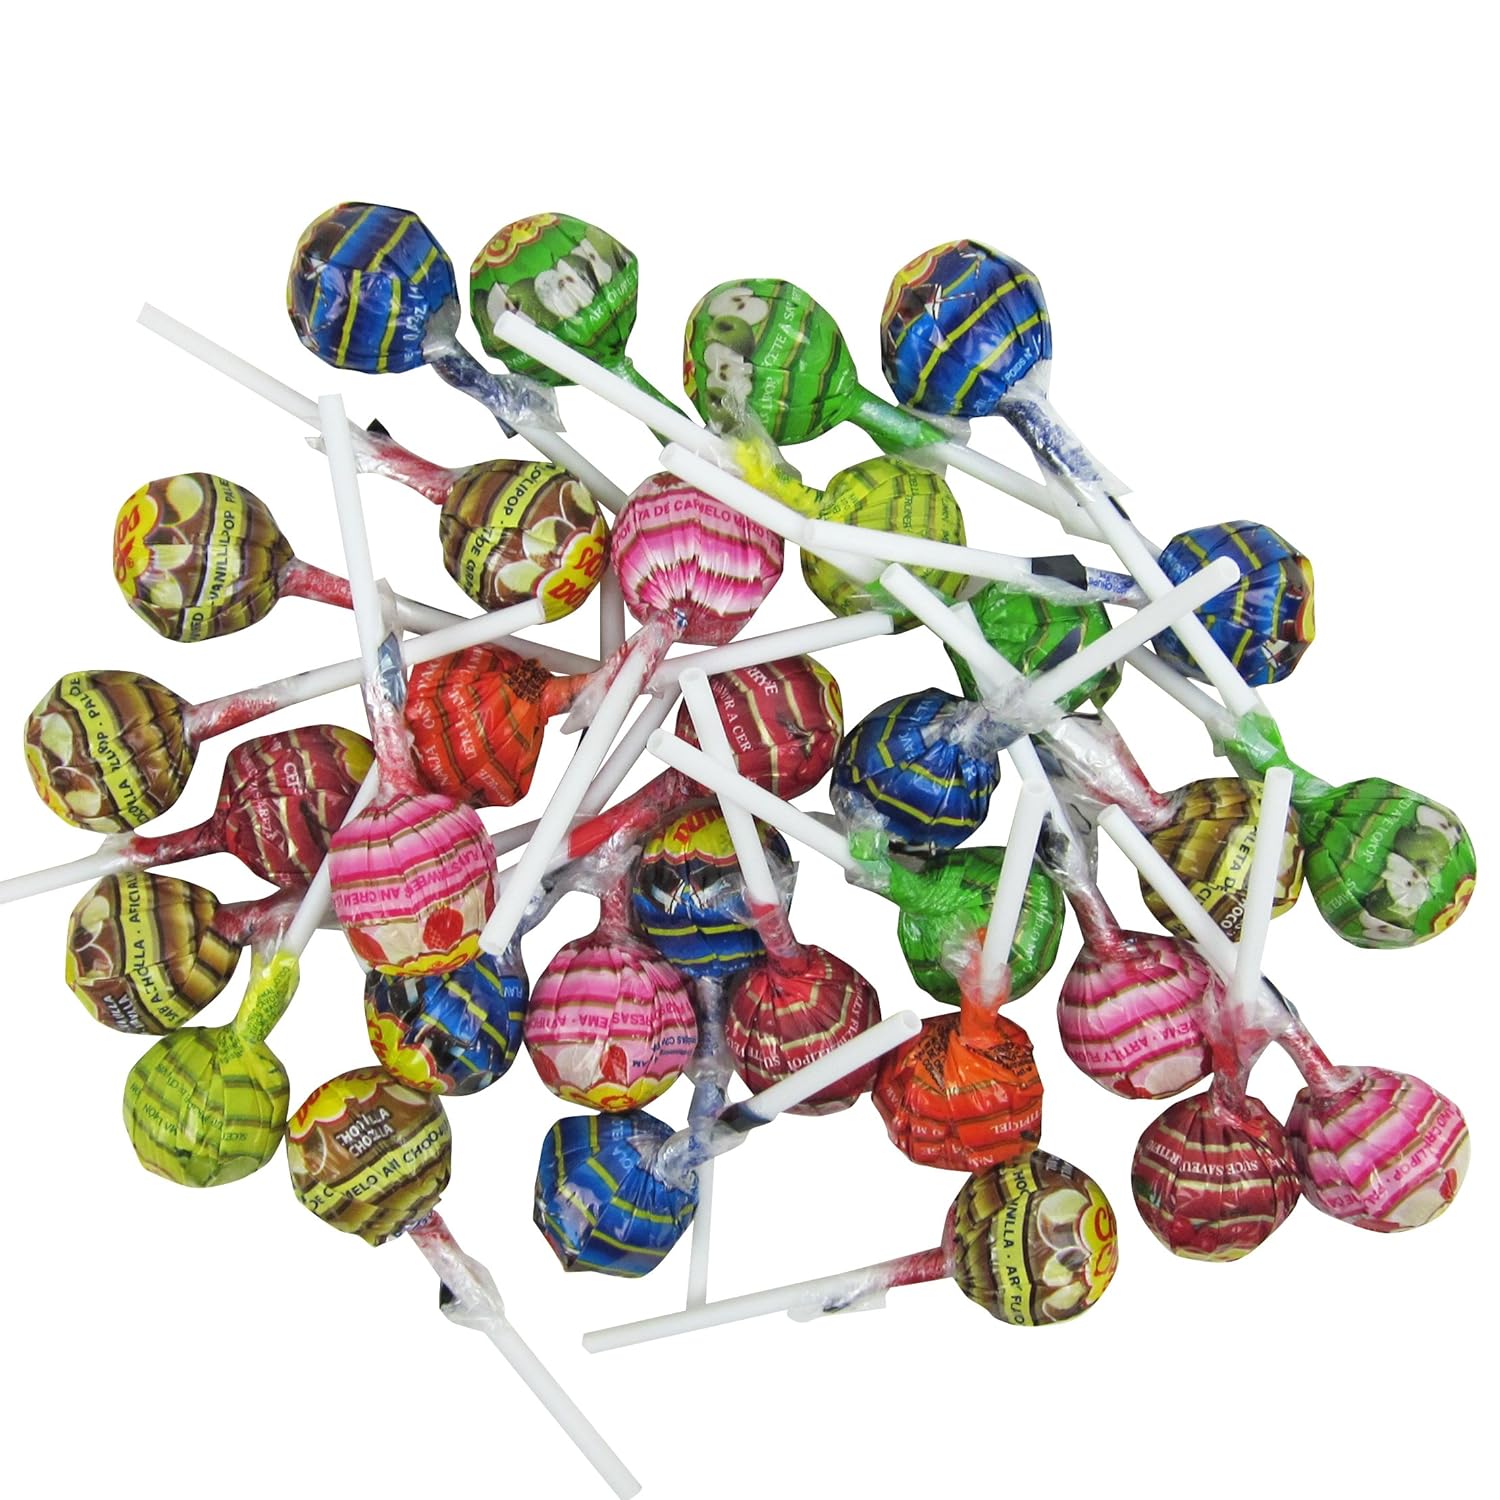  A Great Surprise Chupa Chups Lollipops, Assorted Flavors in 6x6x6 Box Bulk Candy